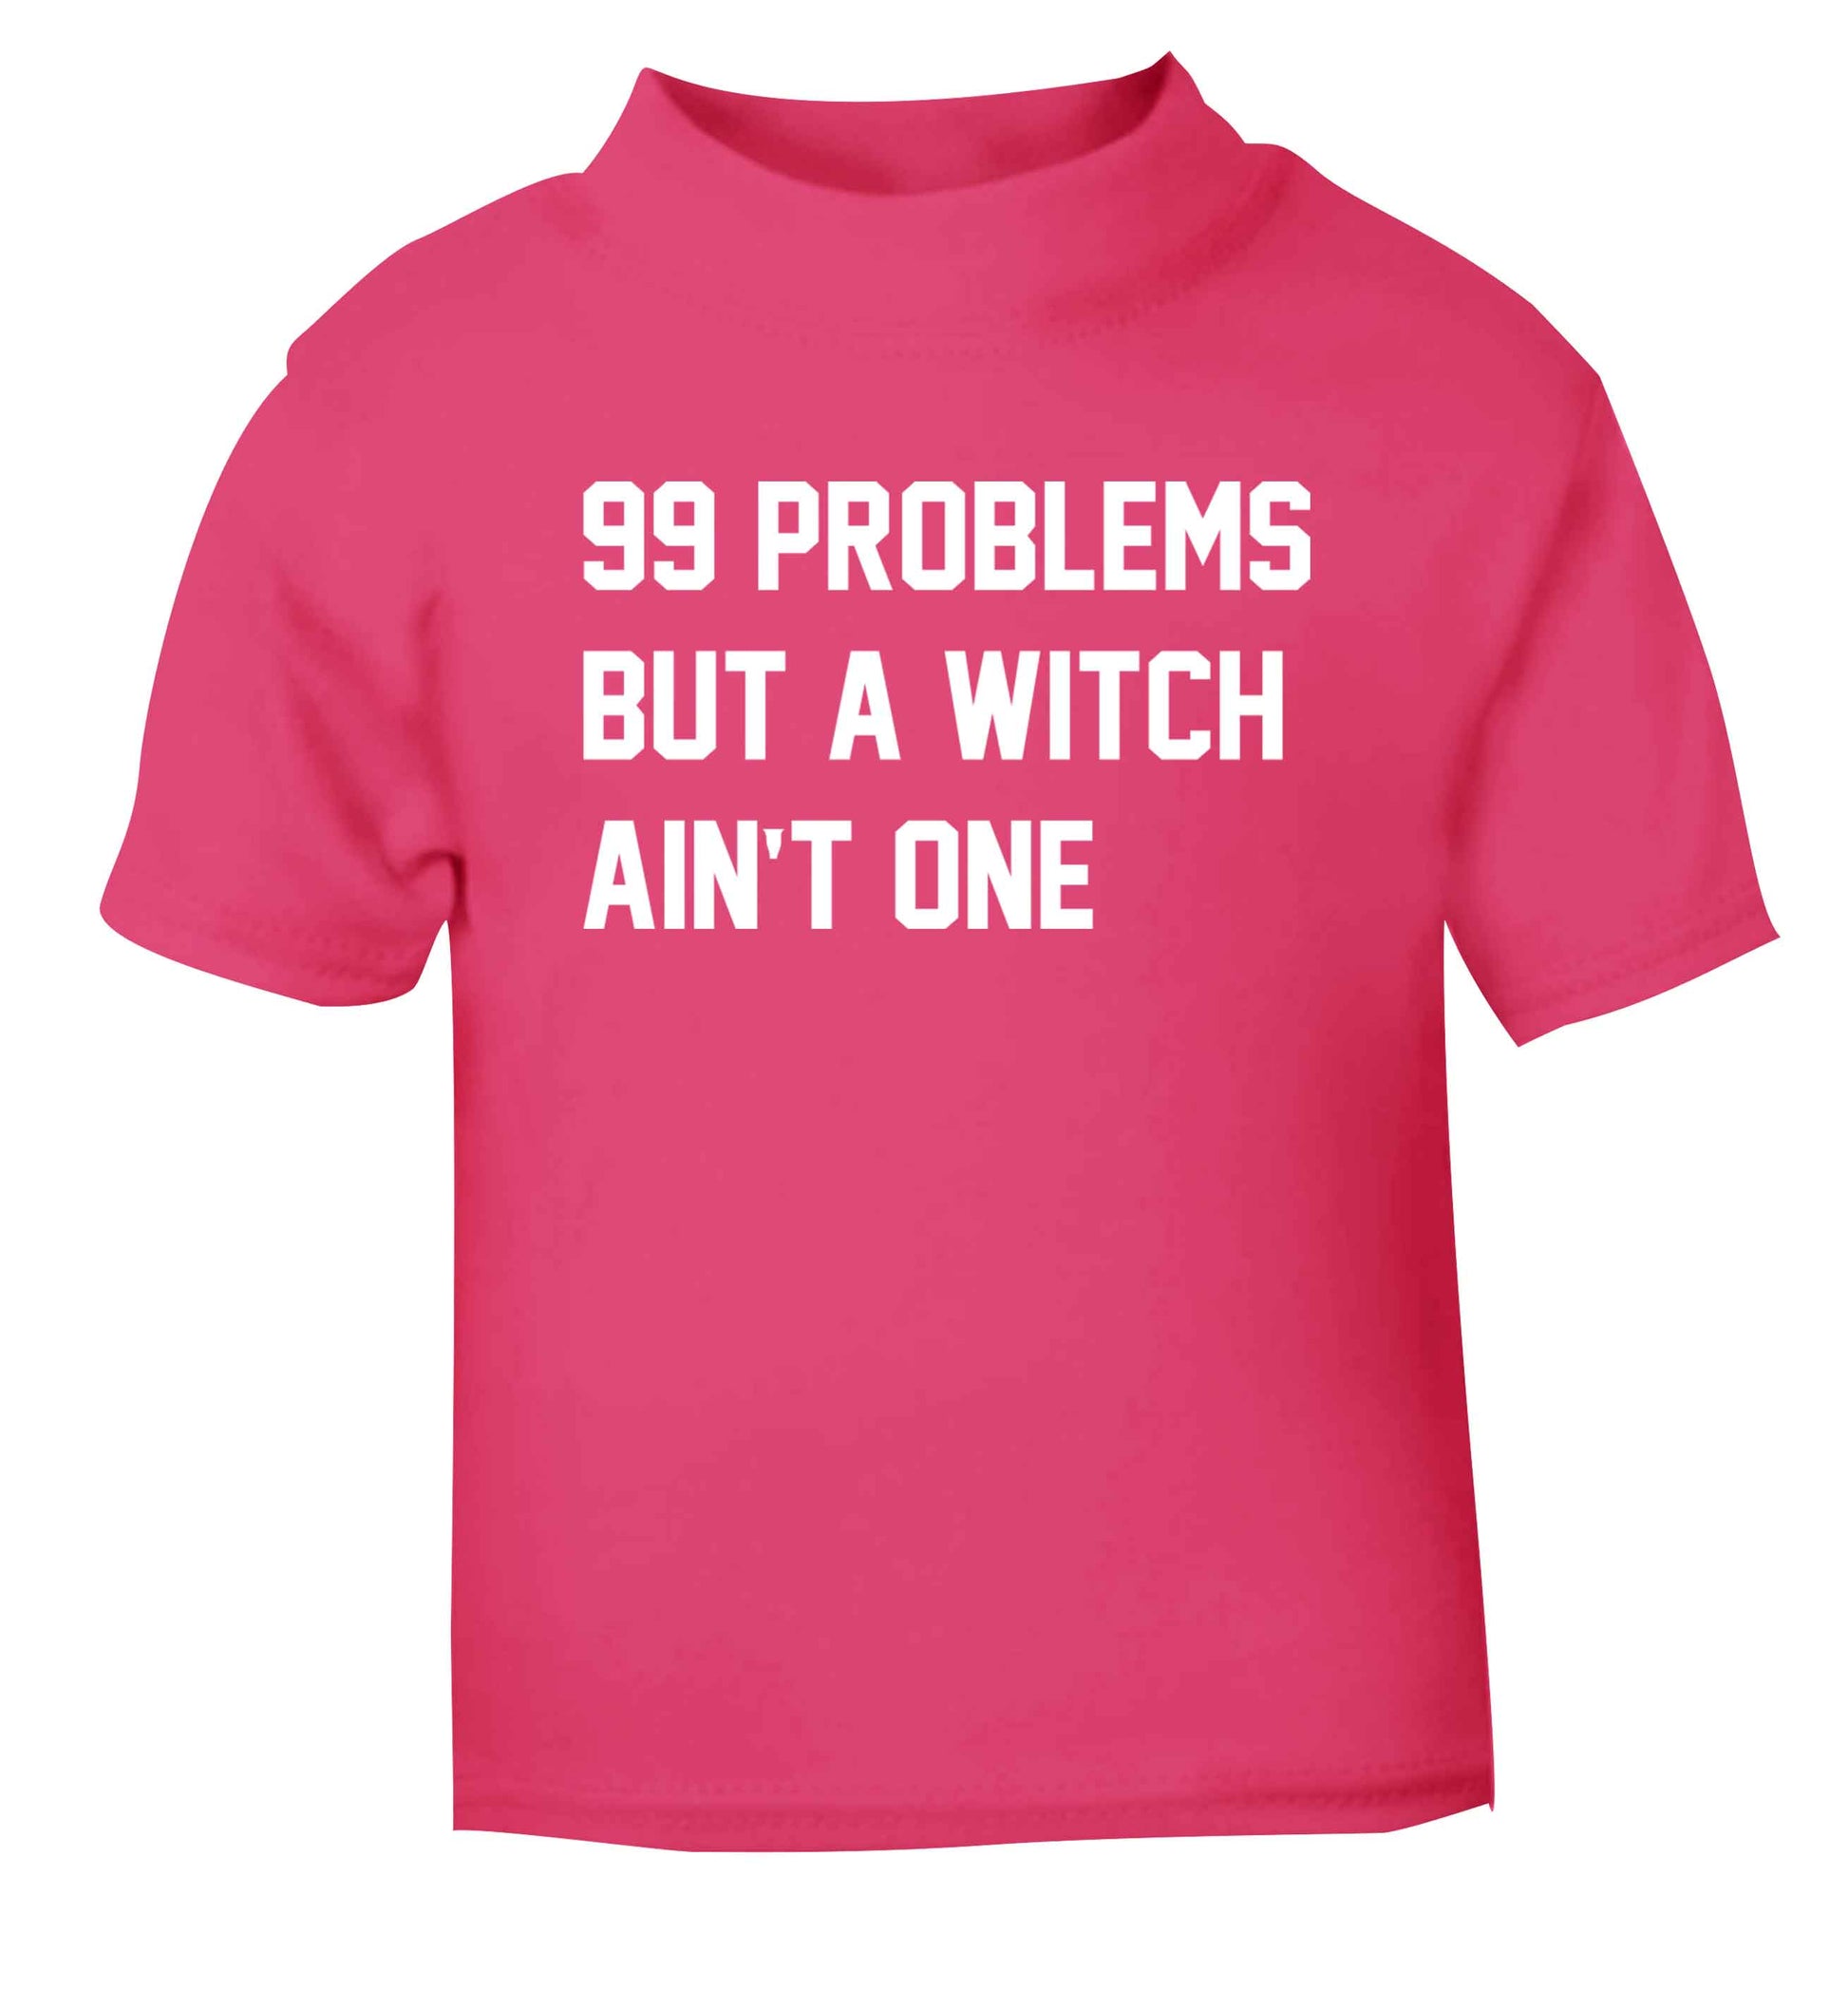 99 Problems but a witch aint one pink baby toddler Tshirt 2 Years